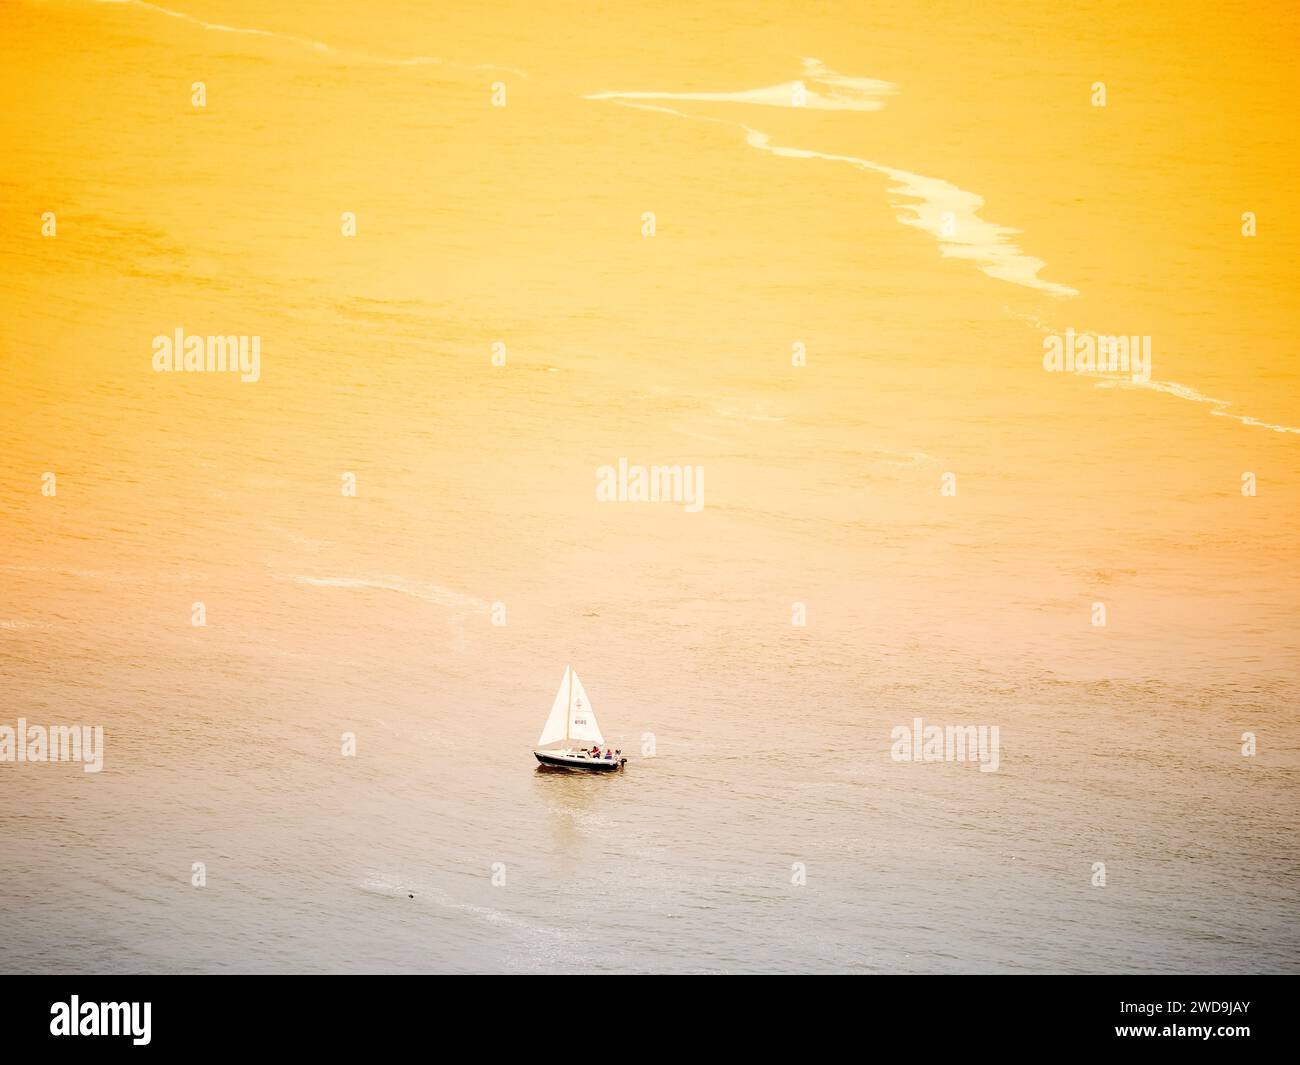 From San Francisco golden gate bridge, sunset shining on ocean surface, a sailboat in the view, Olympus 70-200mm captured this moment. Stock Photo